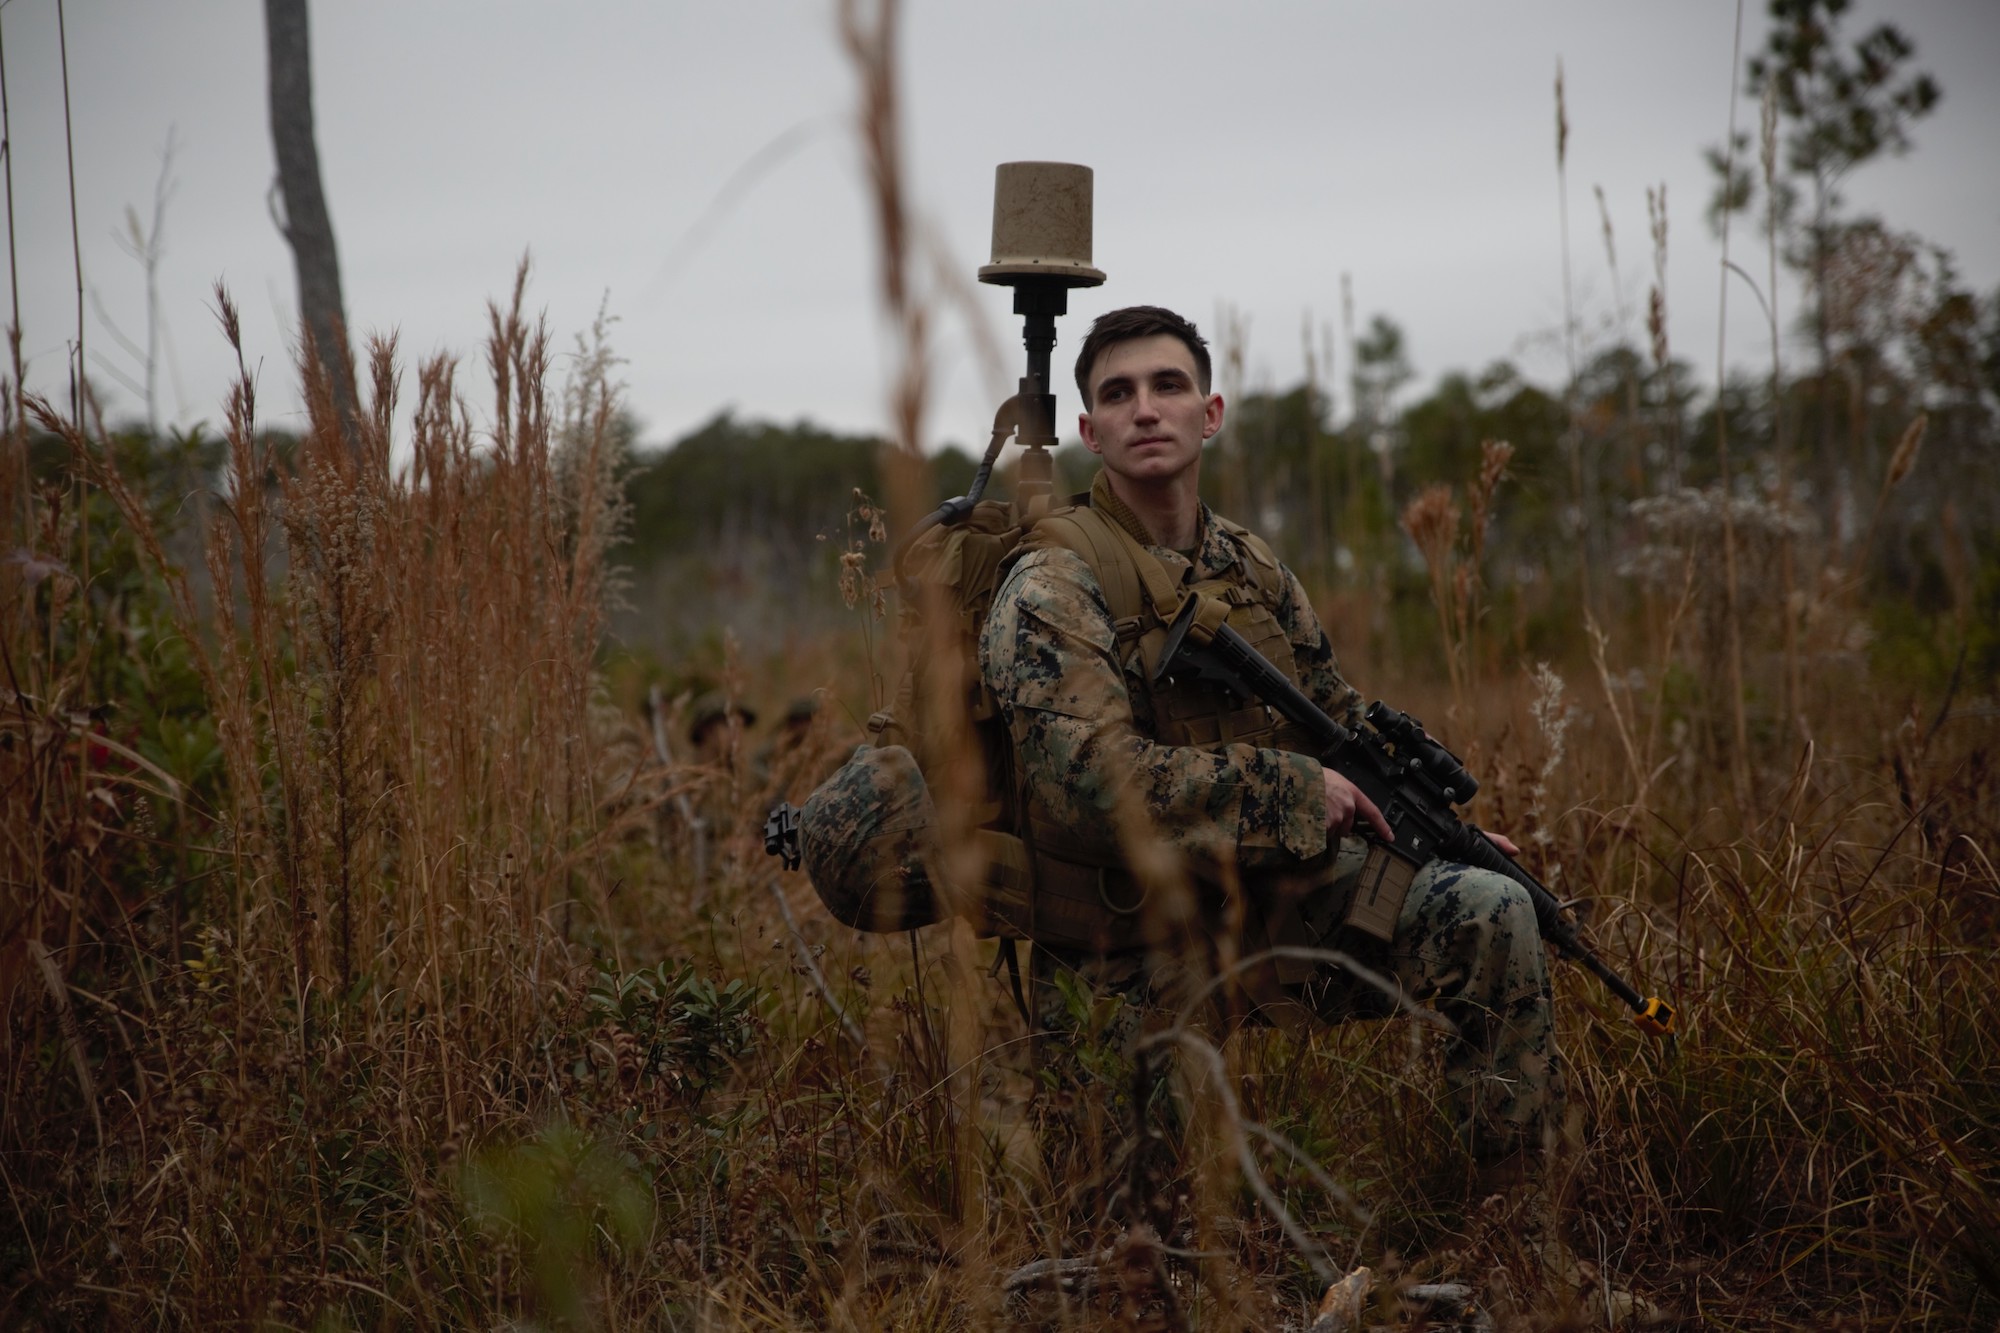 How electronic warfare could factor into the Russia-Ukraine crisis